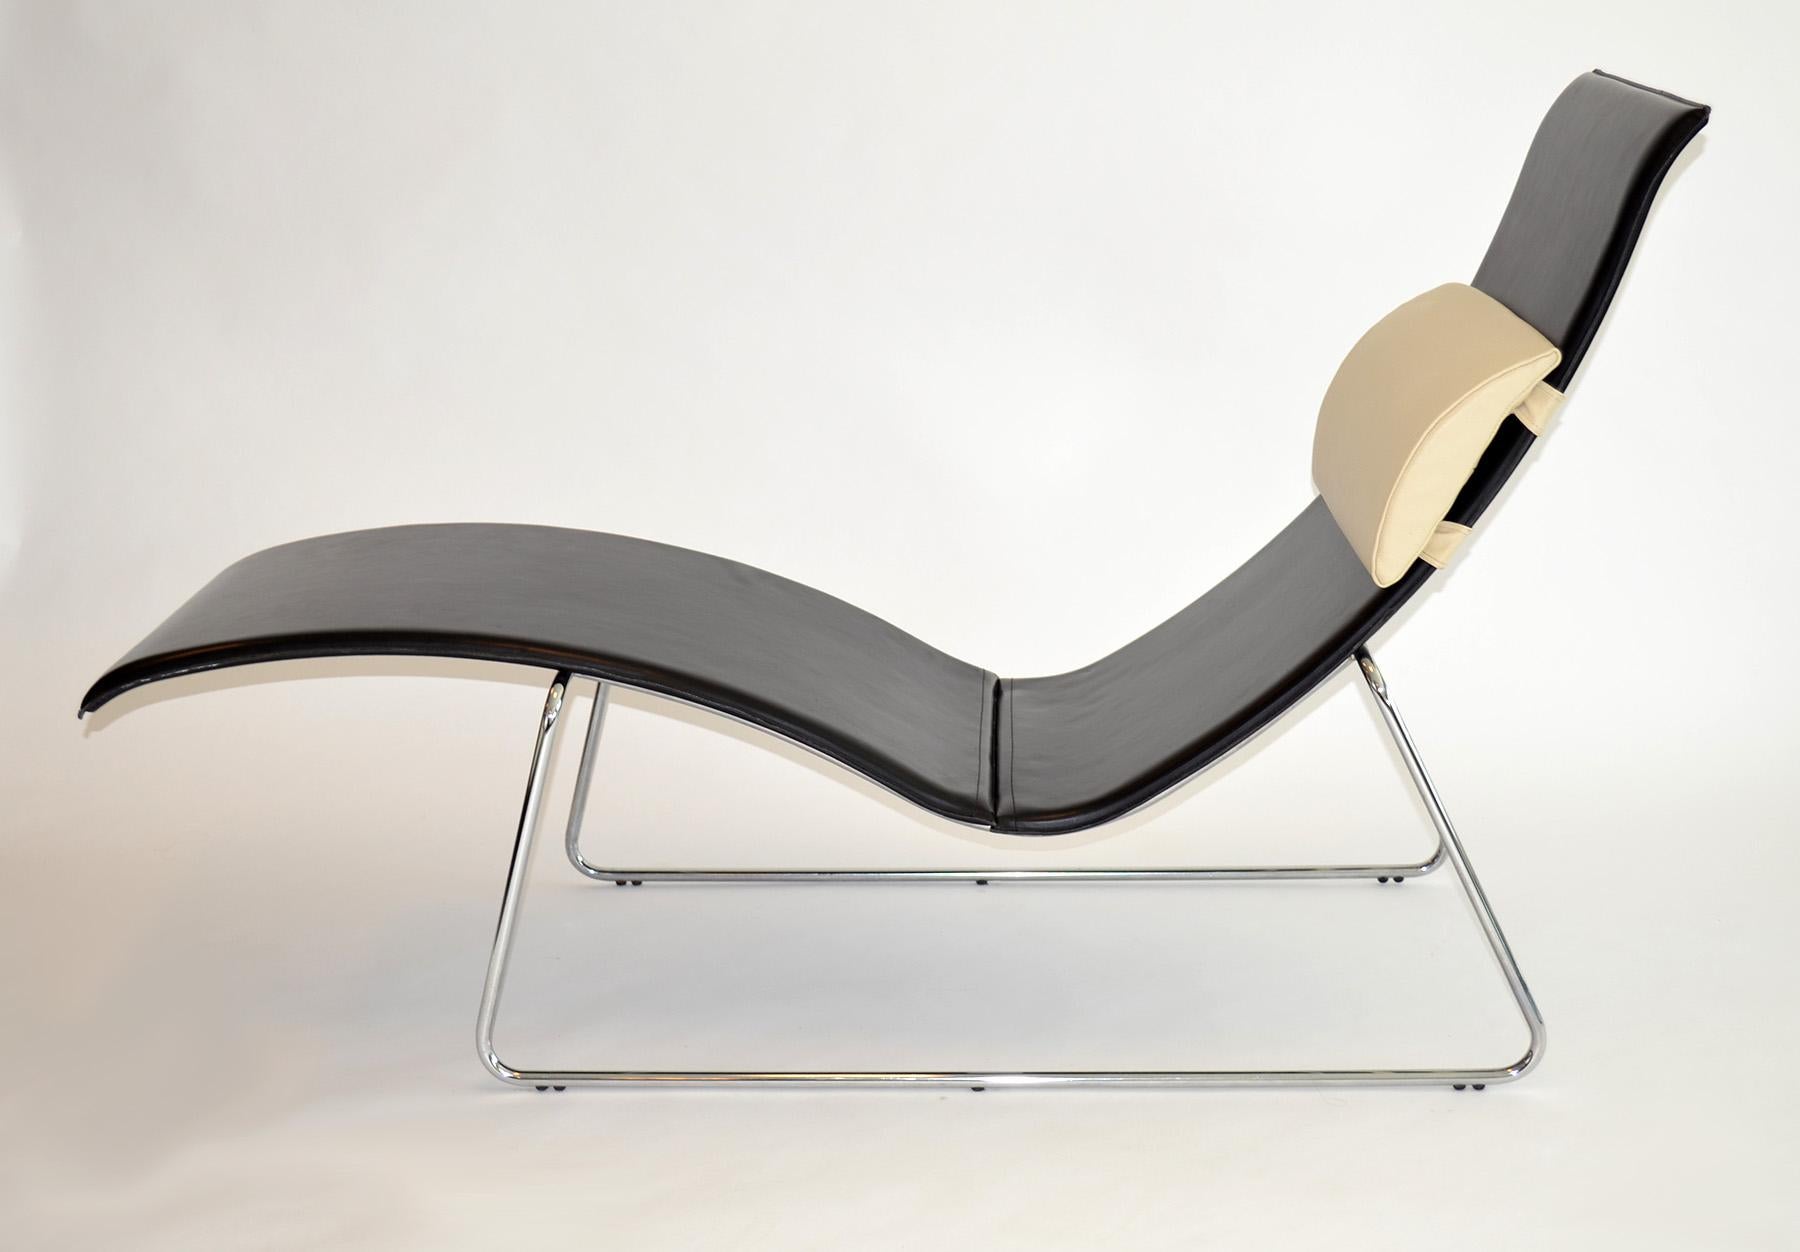 Chaise Longue or Lounge Chair in Black Leather on Steel Base 1990's Italy
Thin-profile and sleek with quality-stitched thick black leather longue recumbent on a minimalist chromed steel base with an off-white pillow. Likely leather over foam-covered